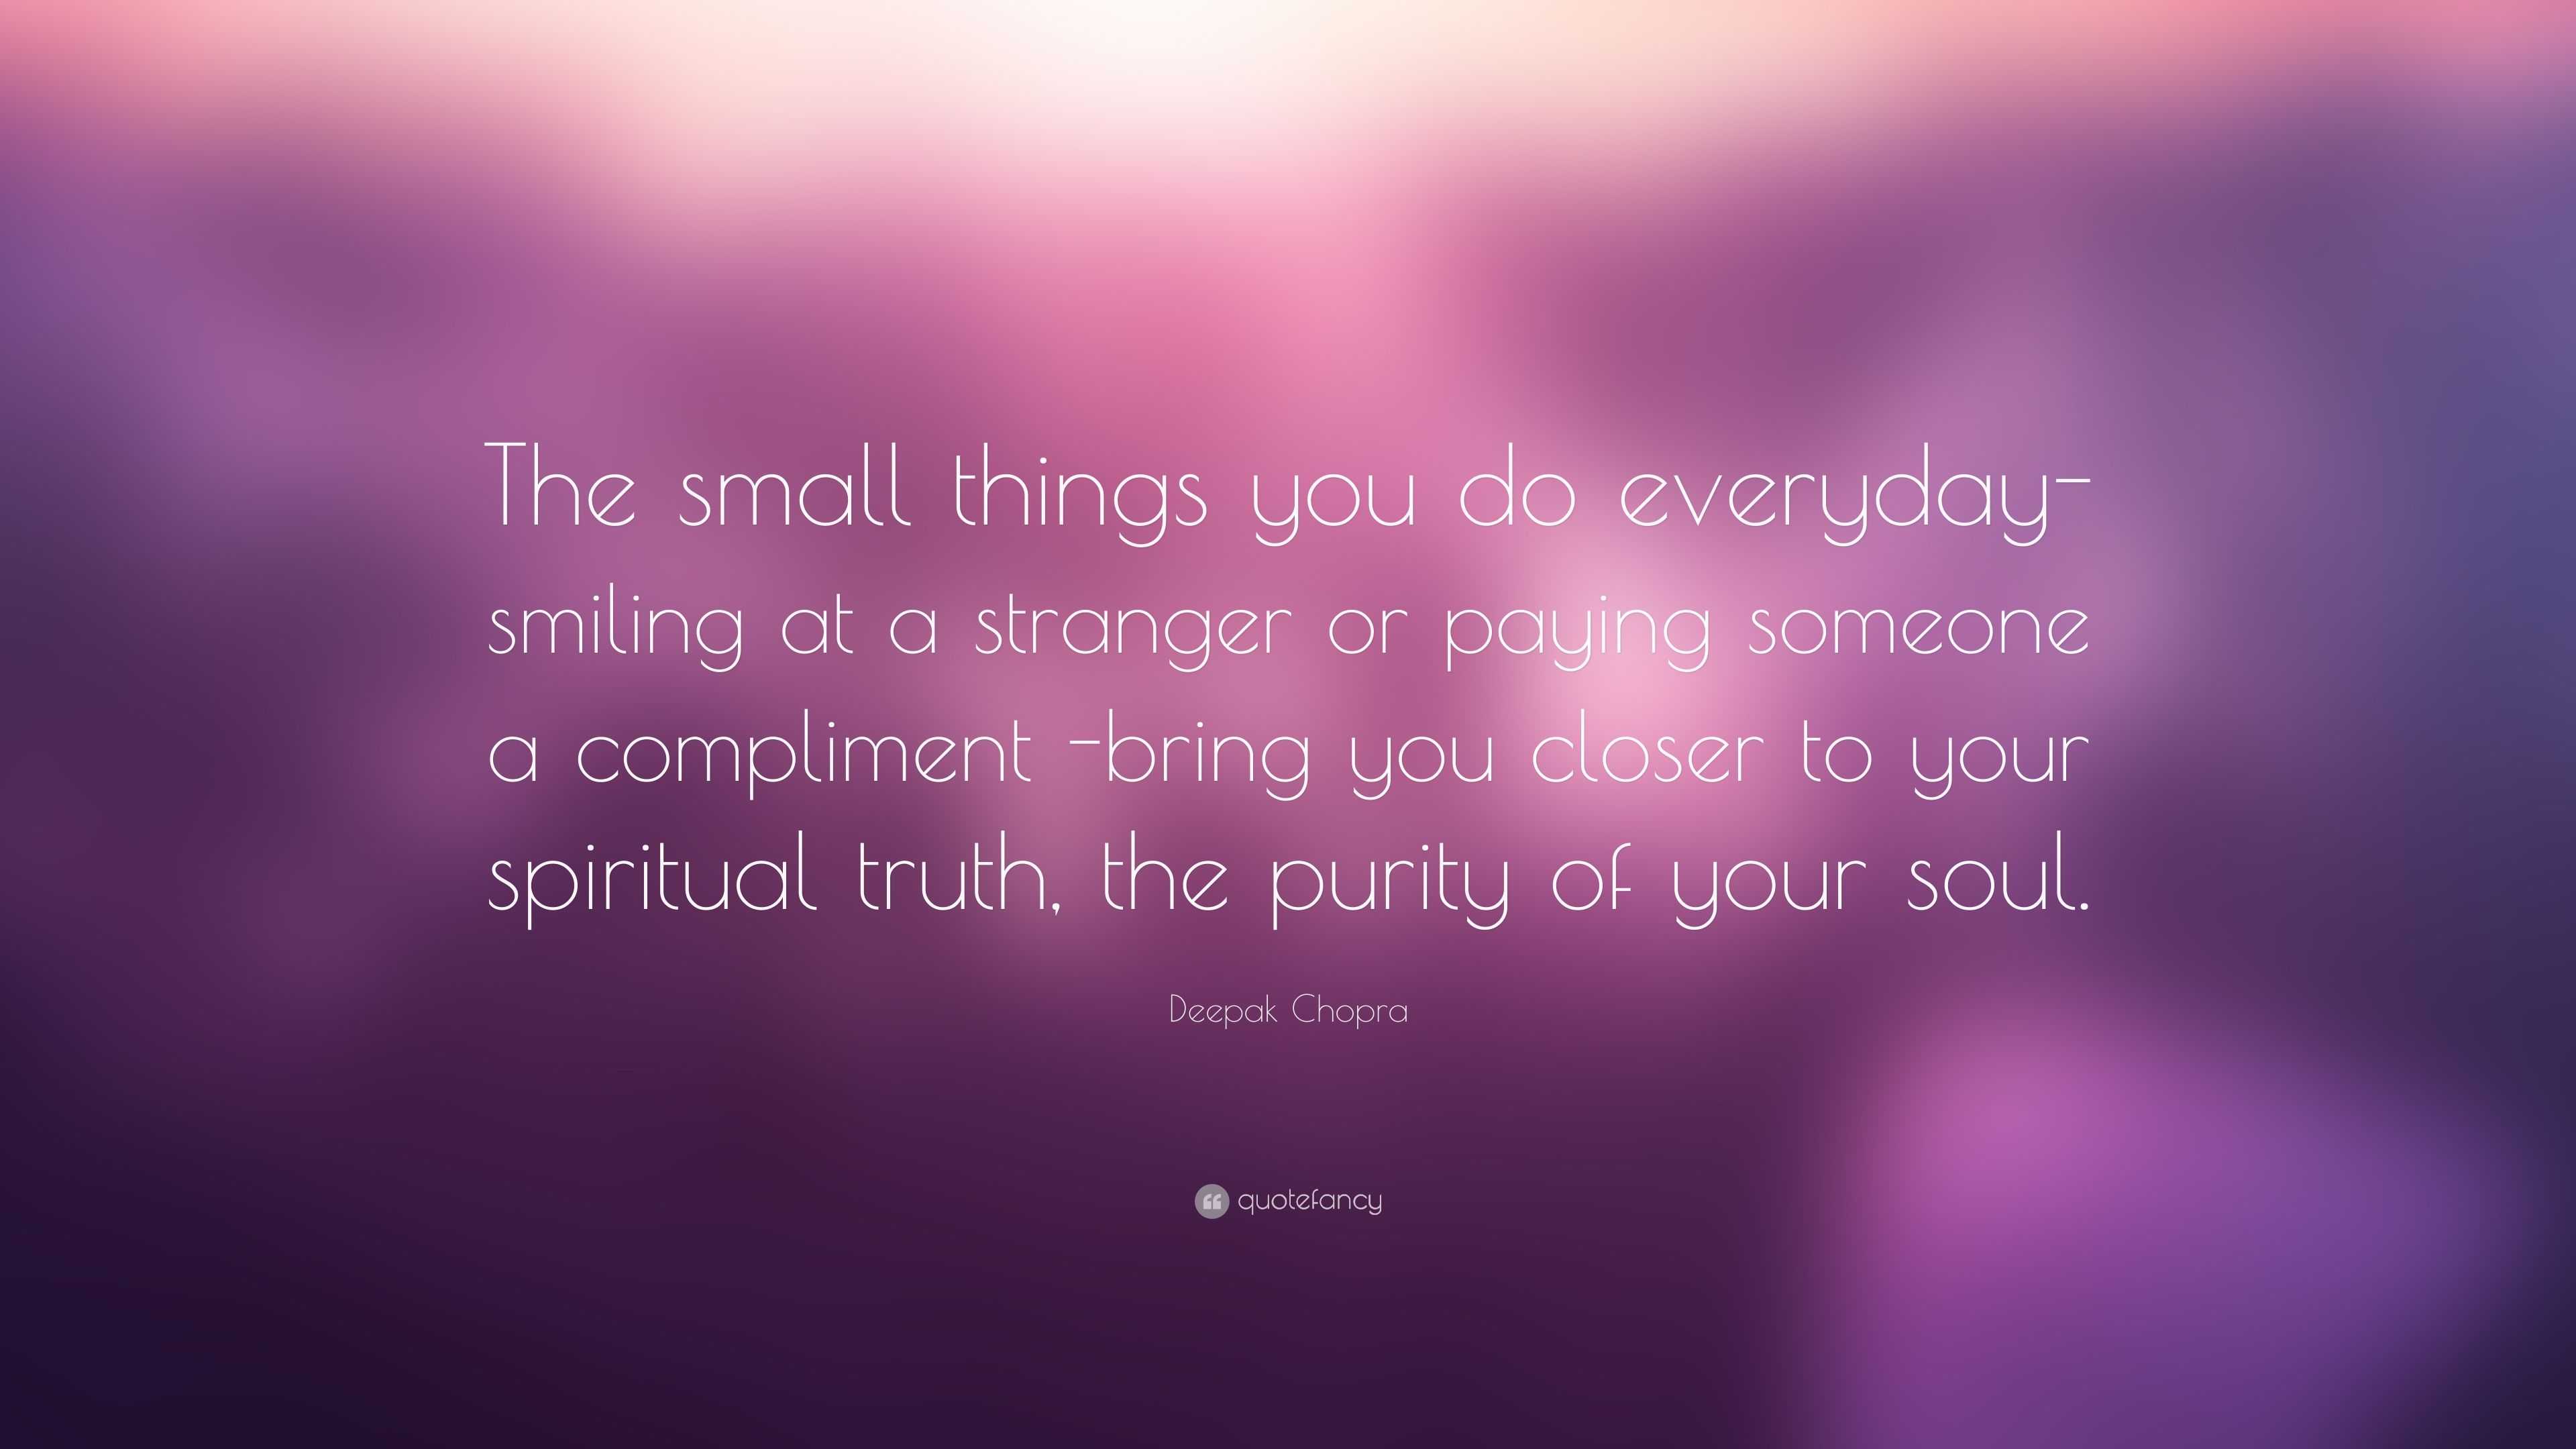 Deepak Chopra Quote: “The small things you do everyday- smiling at a  stranger or paying someone a compliment -bring you closer to your  spiritu...”